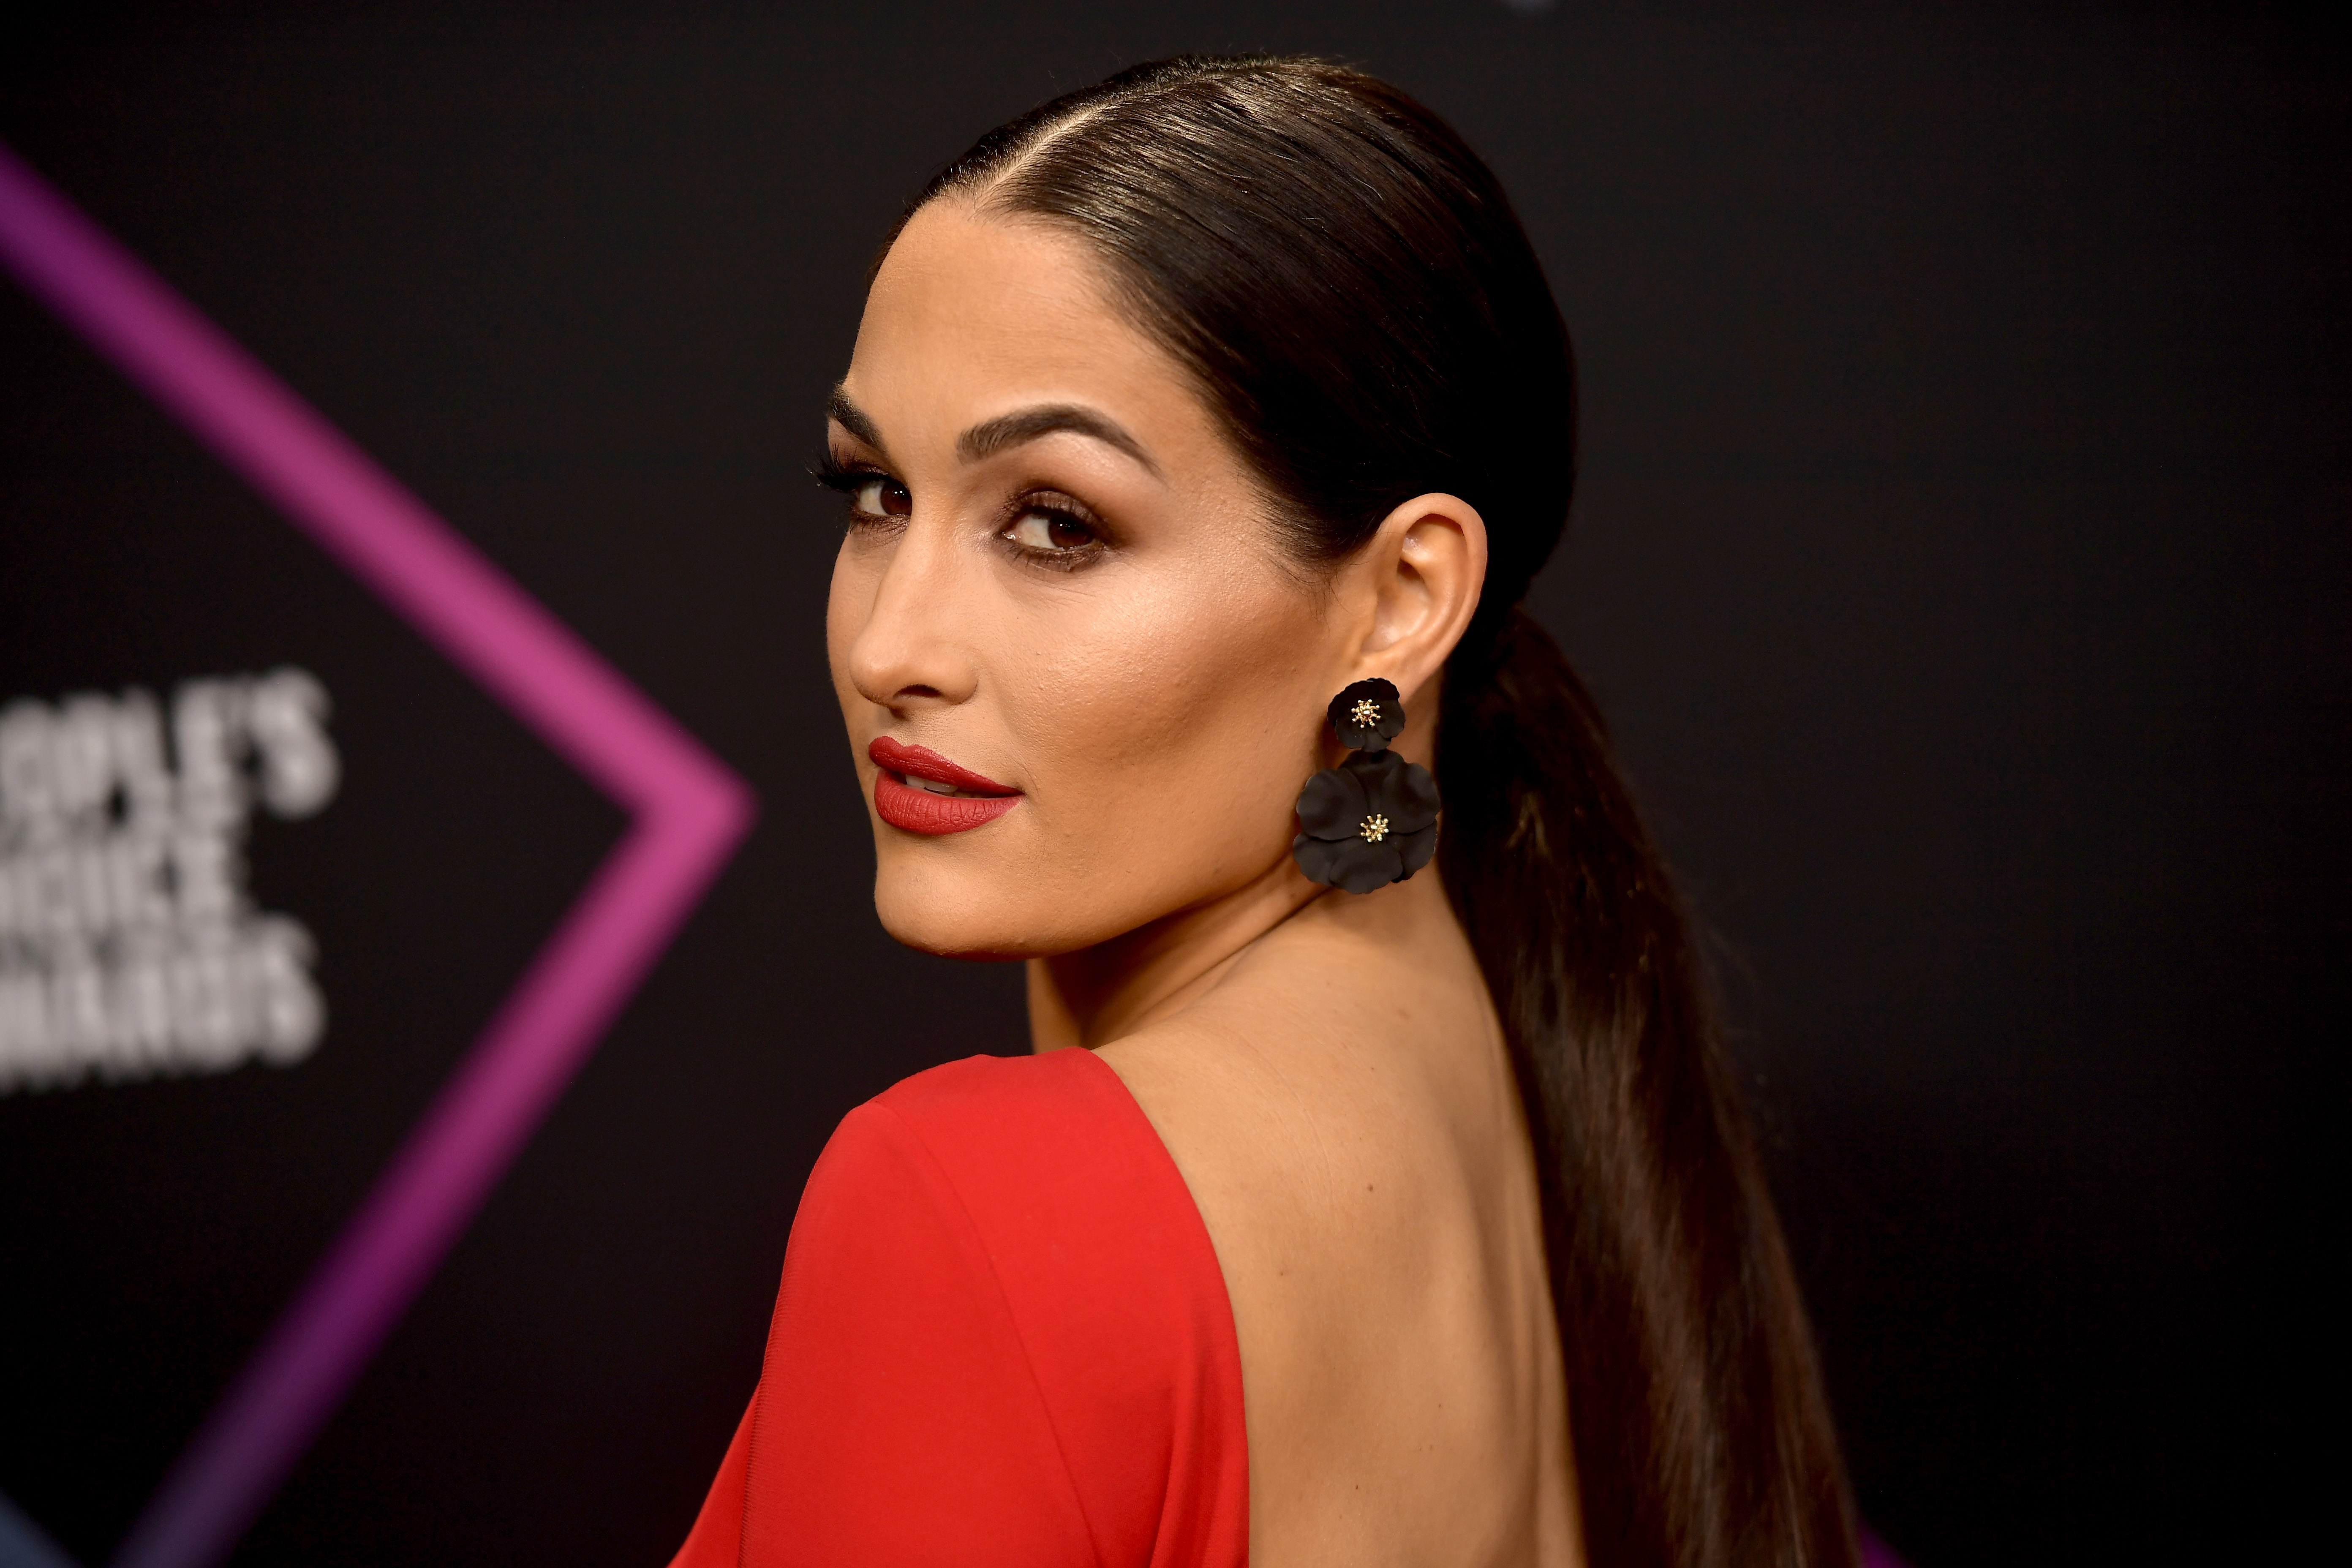 Nikki Bella Says Seeing John Cena With A New Woman Will “Kill” Her